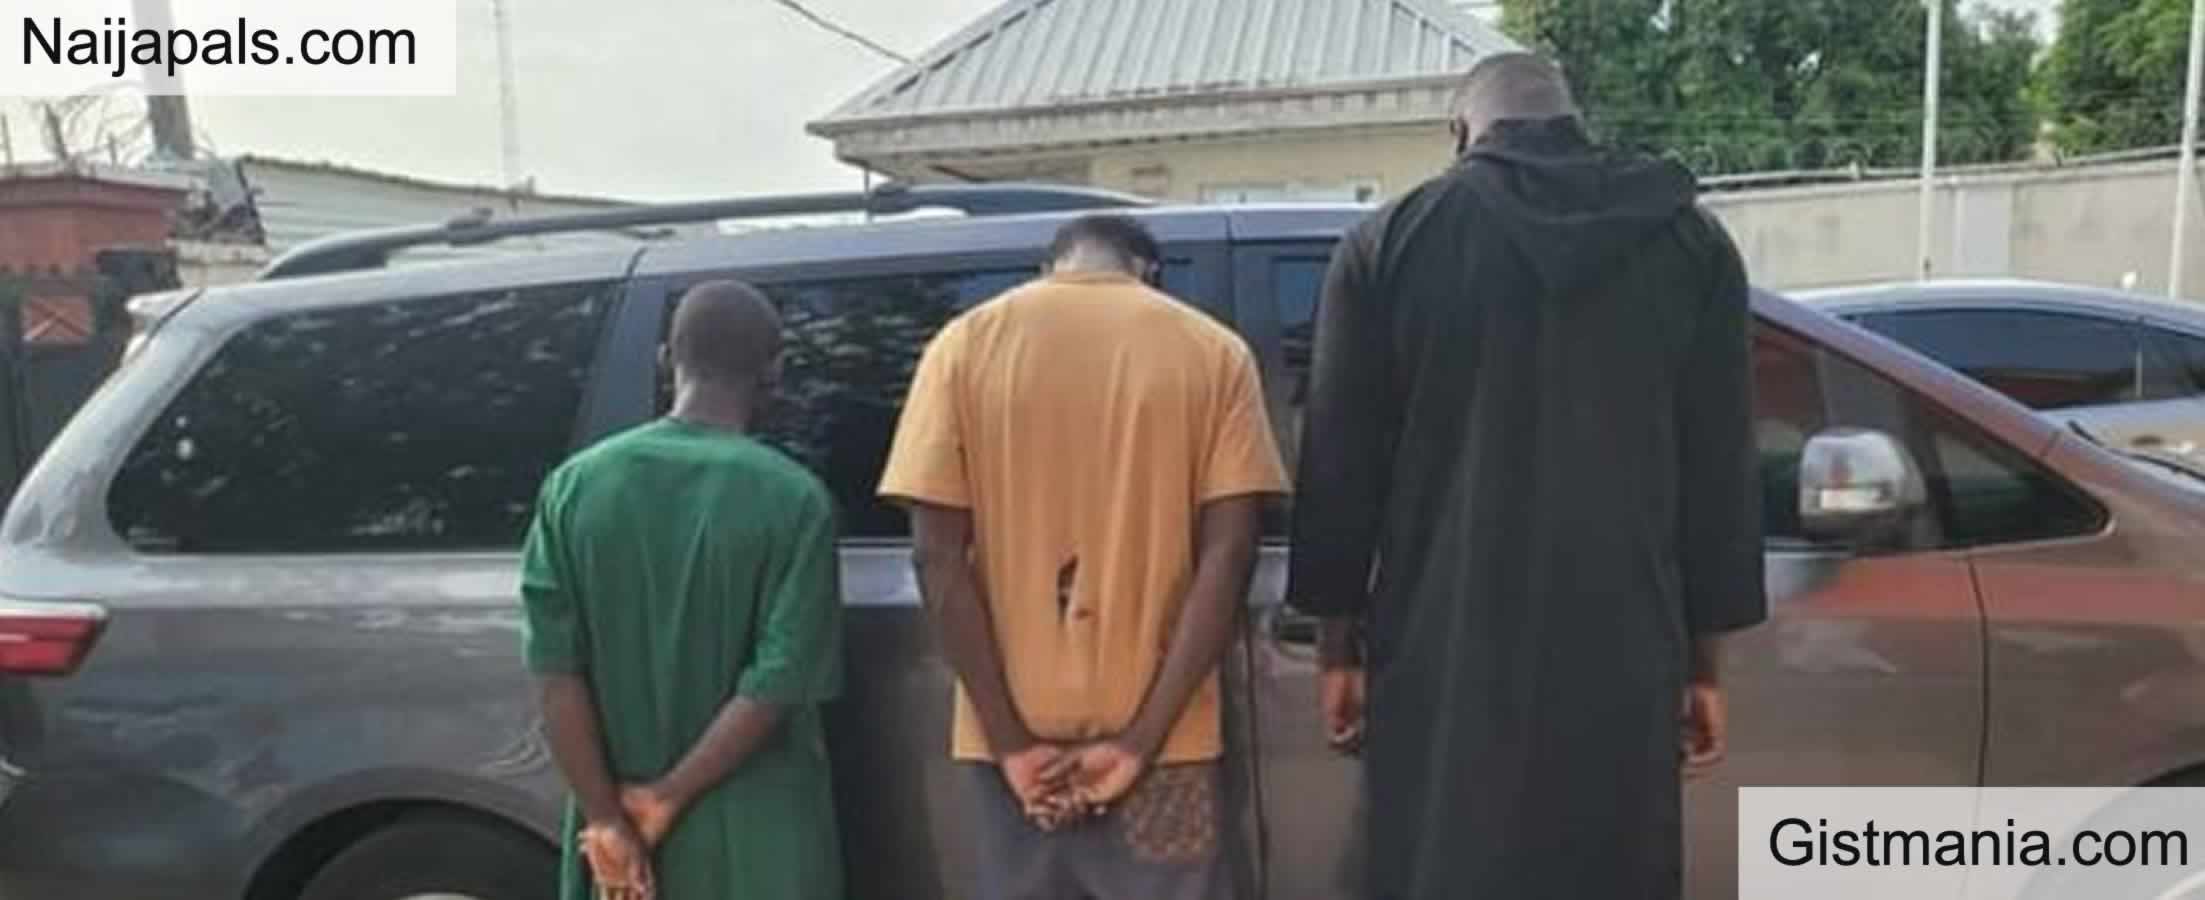 Three Siblings Arrested By EFCC For Suspected Internet Fraud- <em>By Gistmania Naijapals</em>